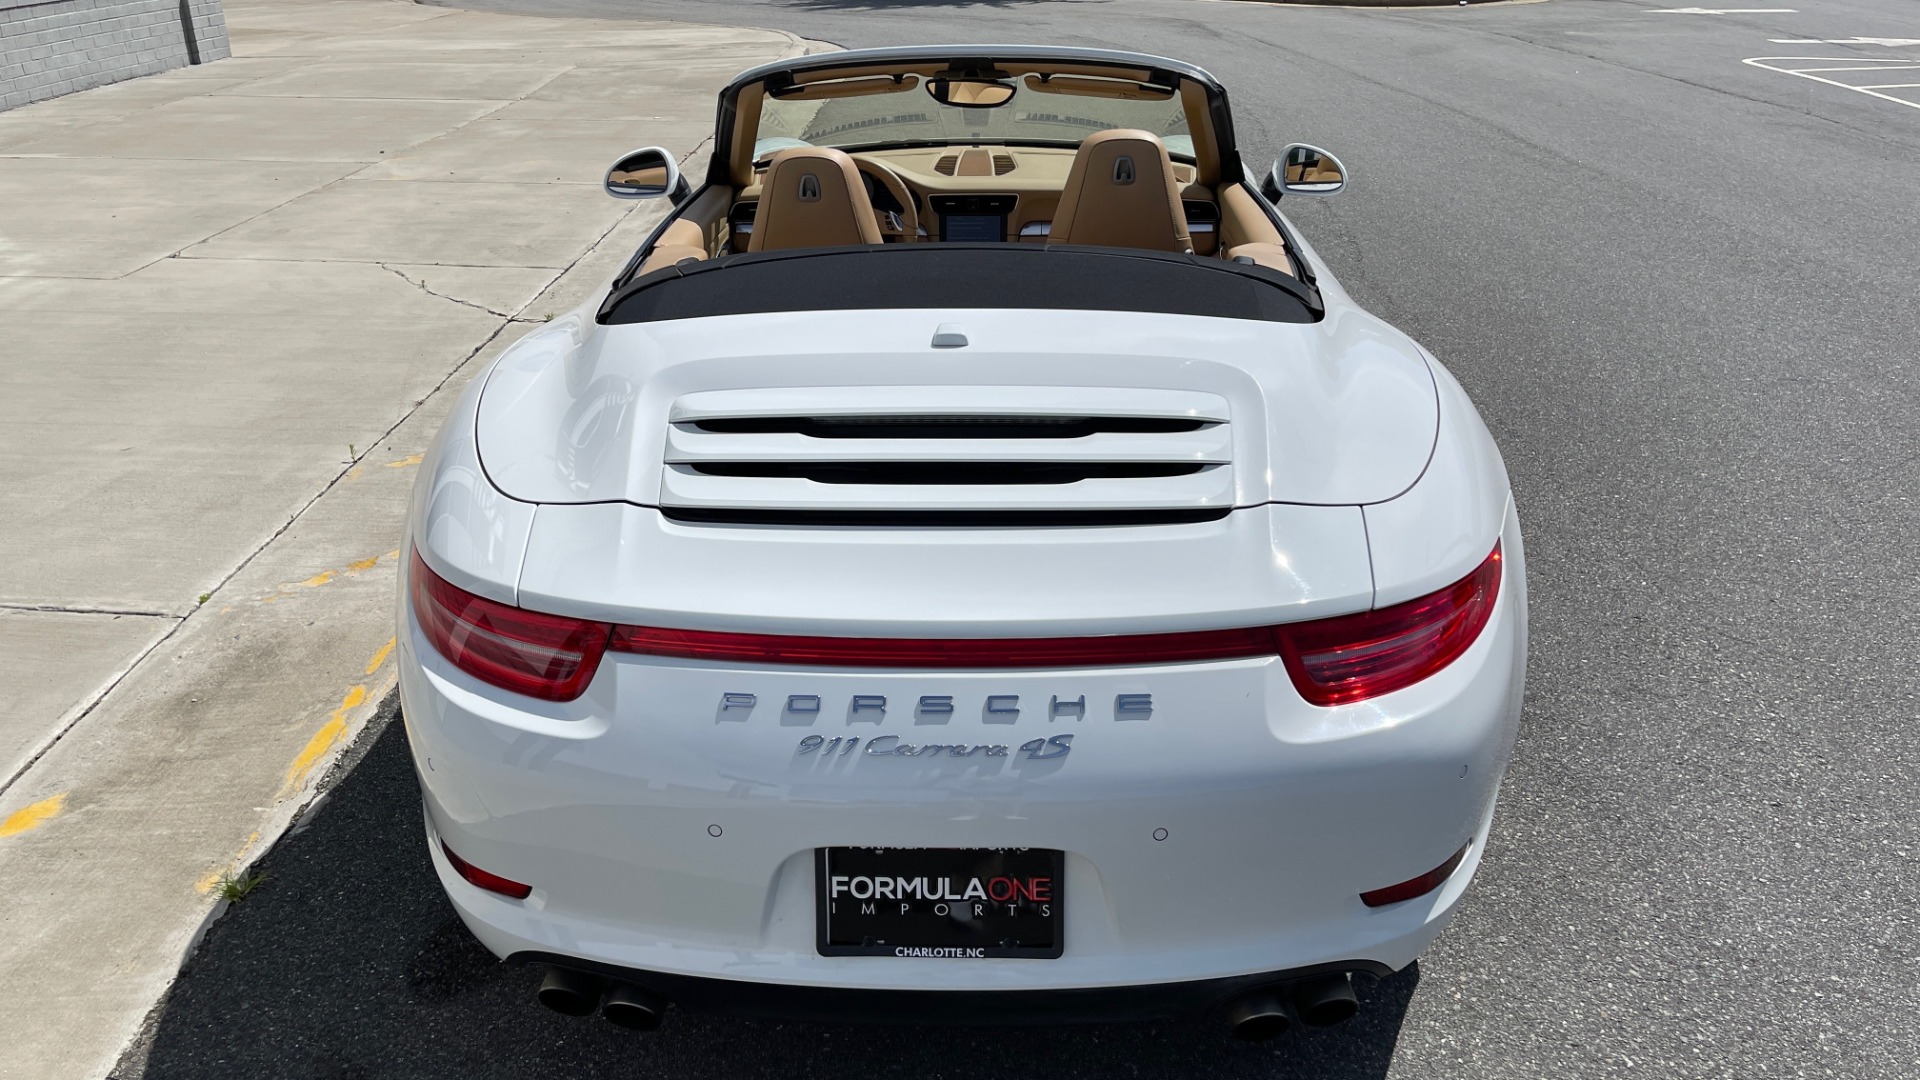 Used 2013 Porsche 911 CARRERA 4S CABRIOLET / PREMIUM PLUS / BOSE / PDK / PDLS for sale Sold at Formula Imports in Charlotte NC 28227 6